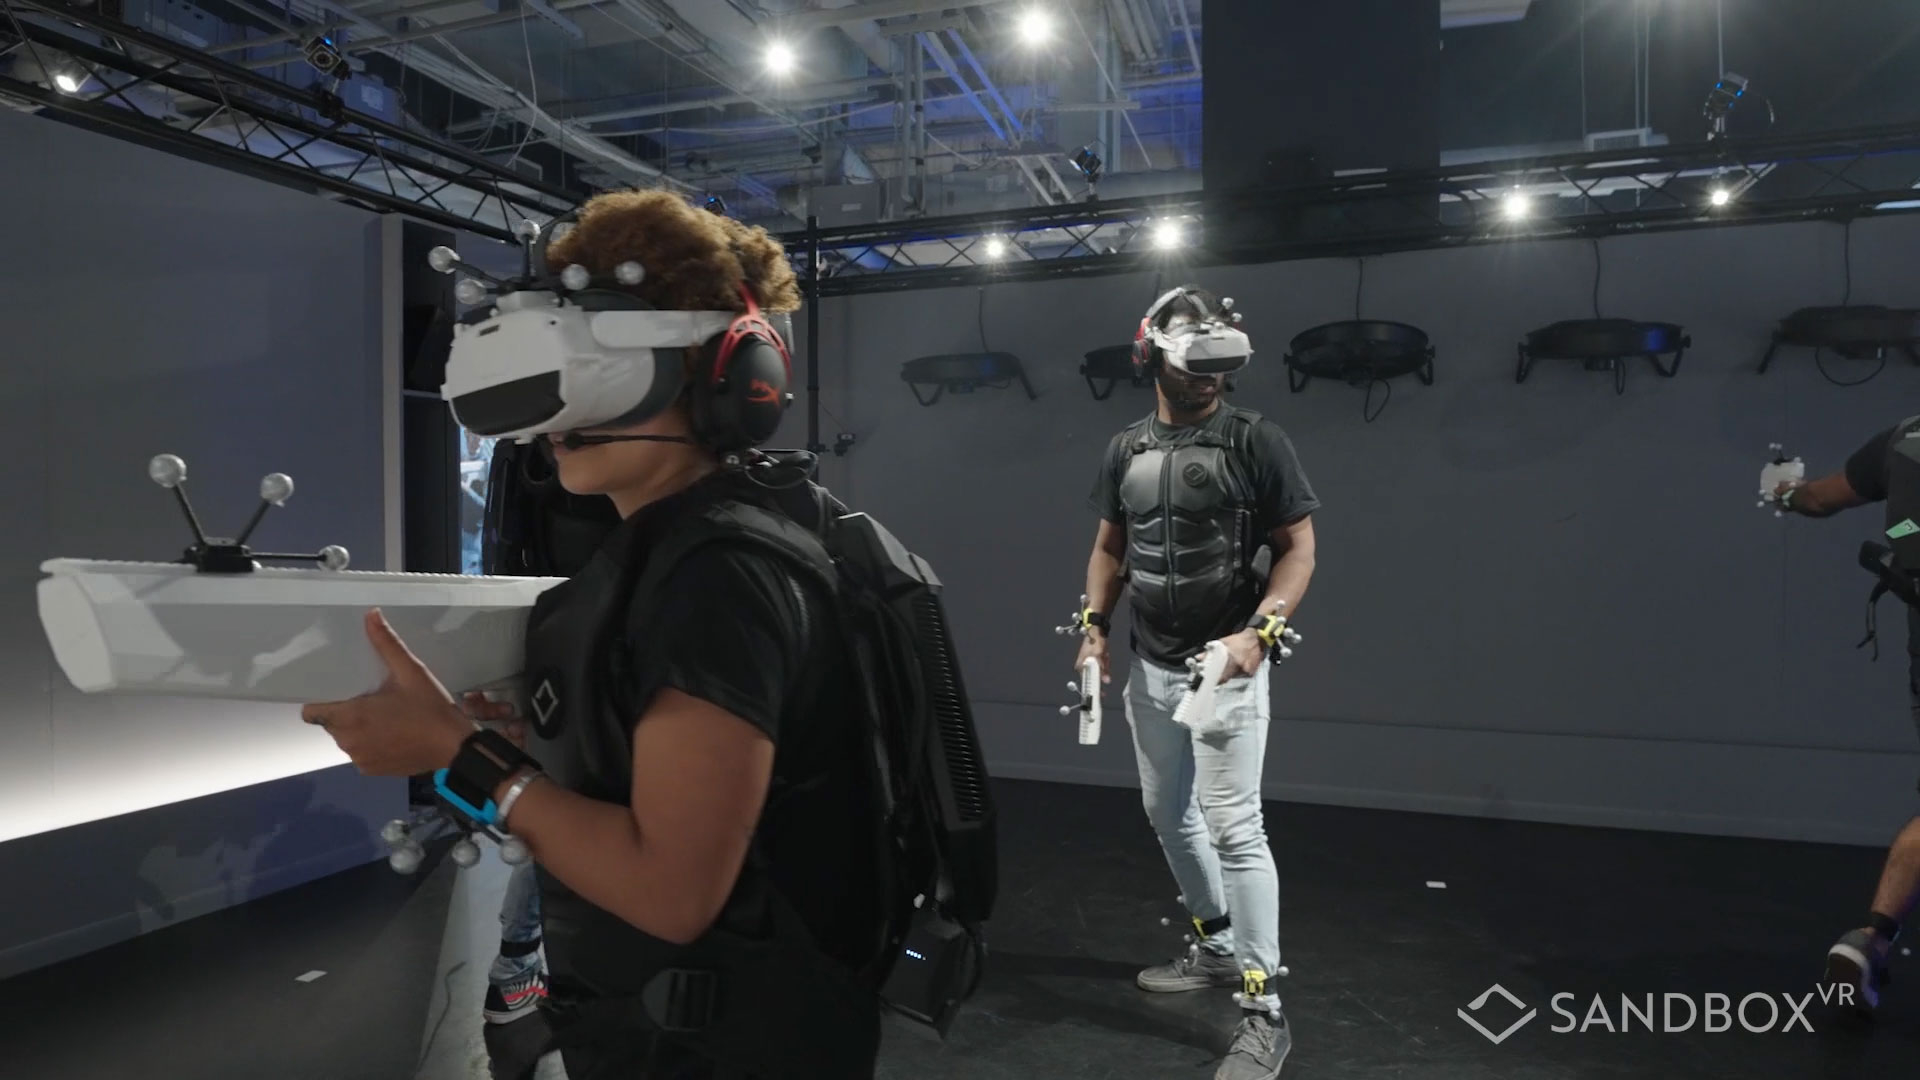 Sandbox VR is the world's premier destination for premium location-based virtual reality games. Sandbox VR has created the world’s most immersive full-body VR platform and boasts games you can’t play anywhere else.